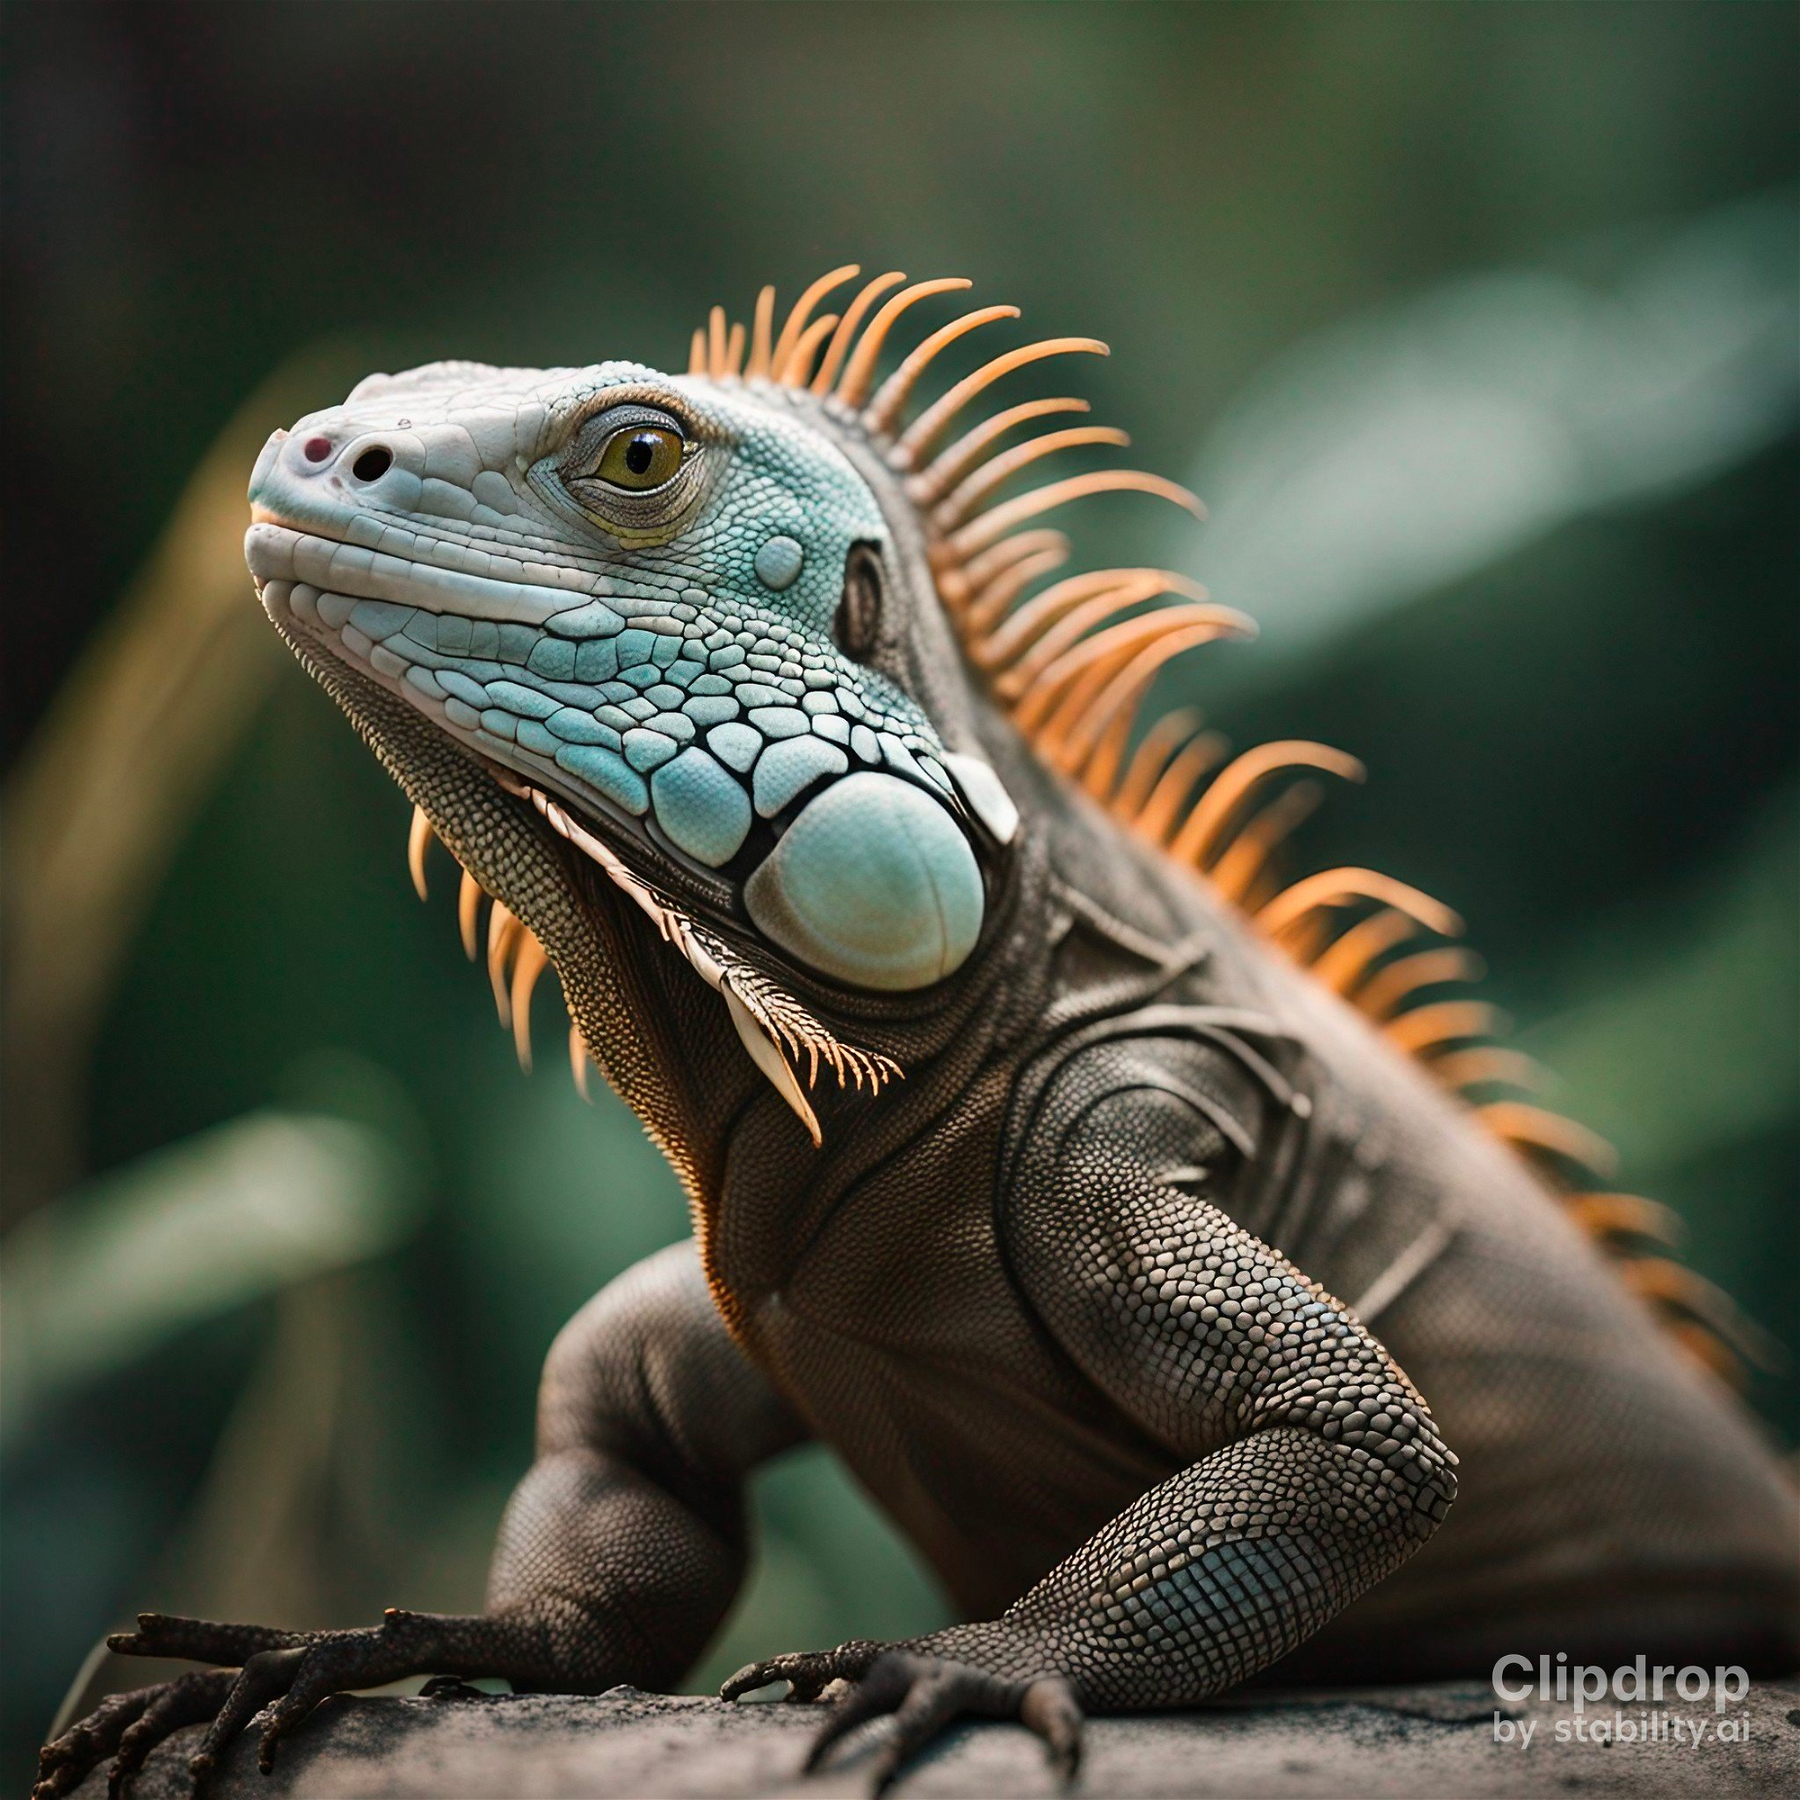 an iguana shot with Sony Alpha a9 II and Sony FE 200-600mm f/5.6-6.3 G OSS lens, natural light
style: photographic